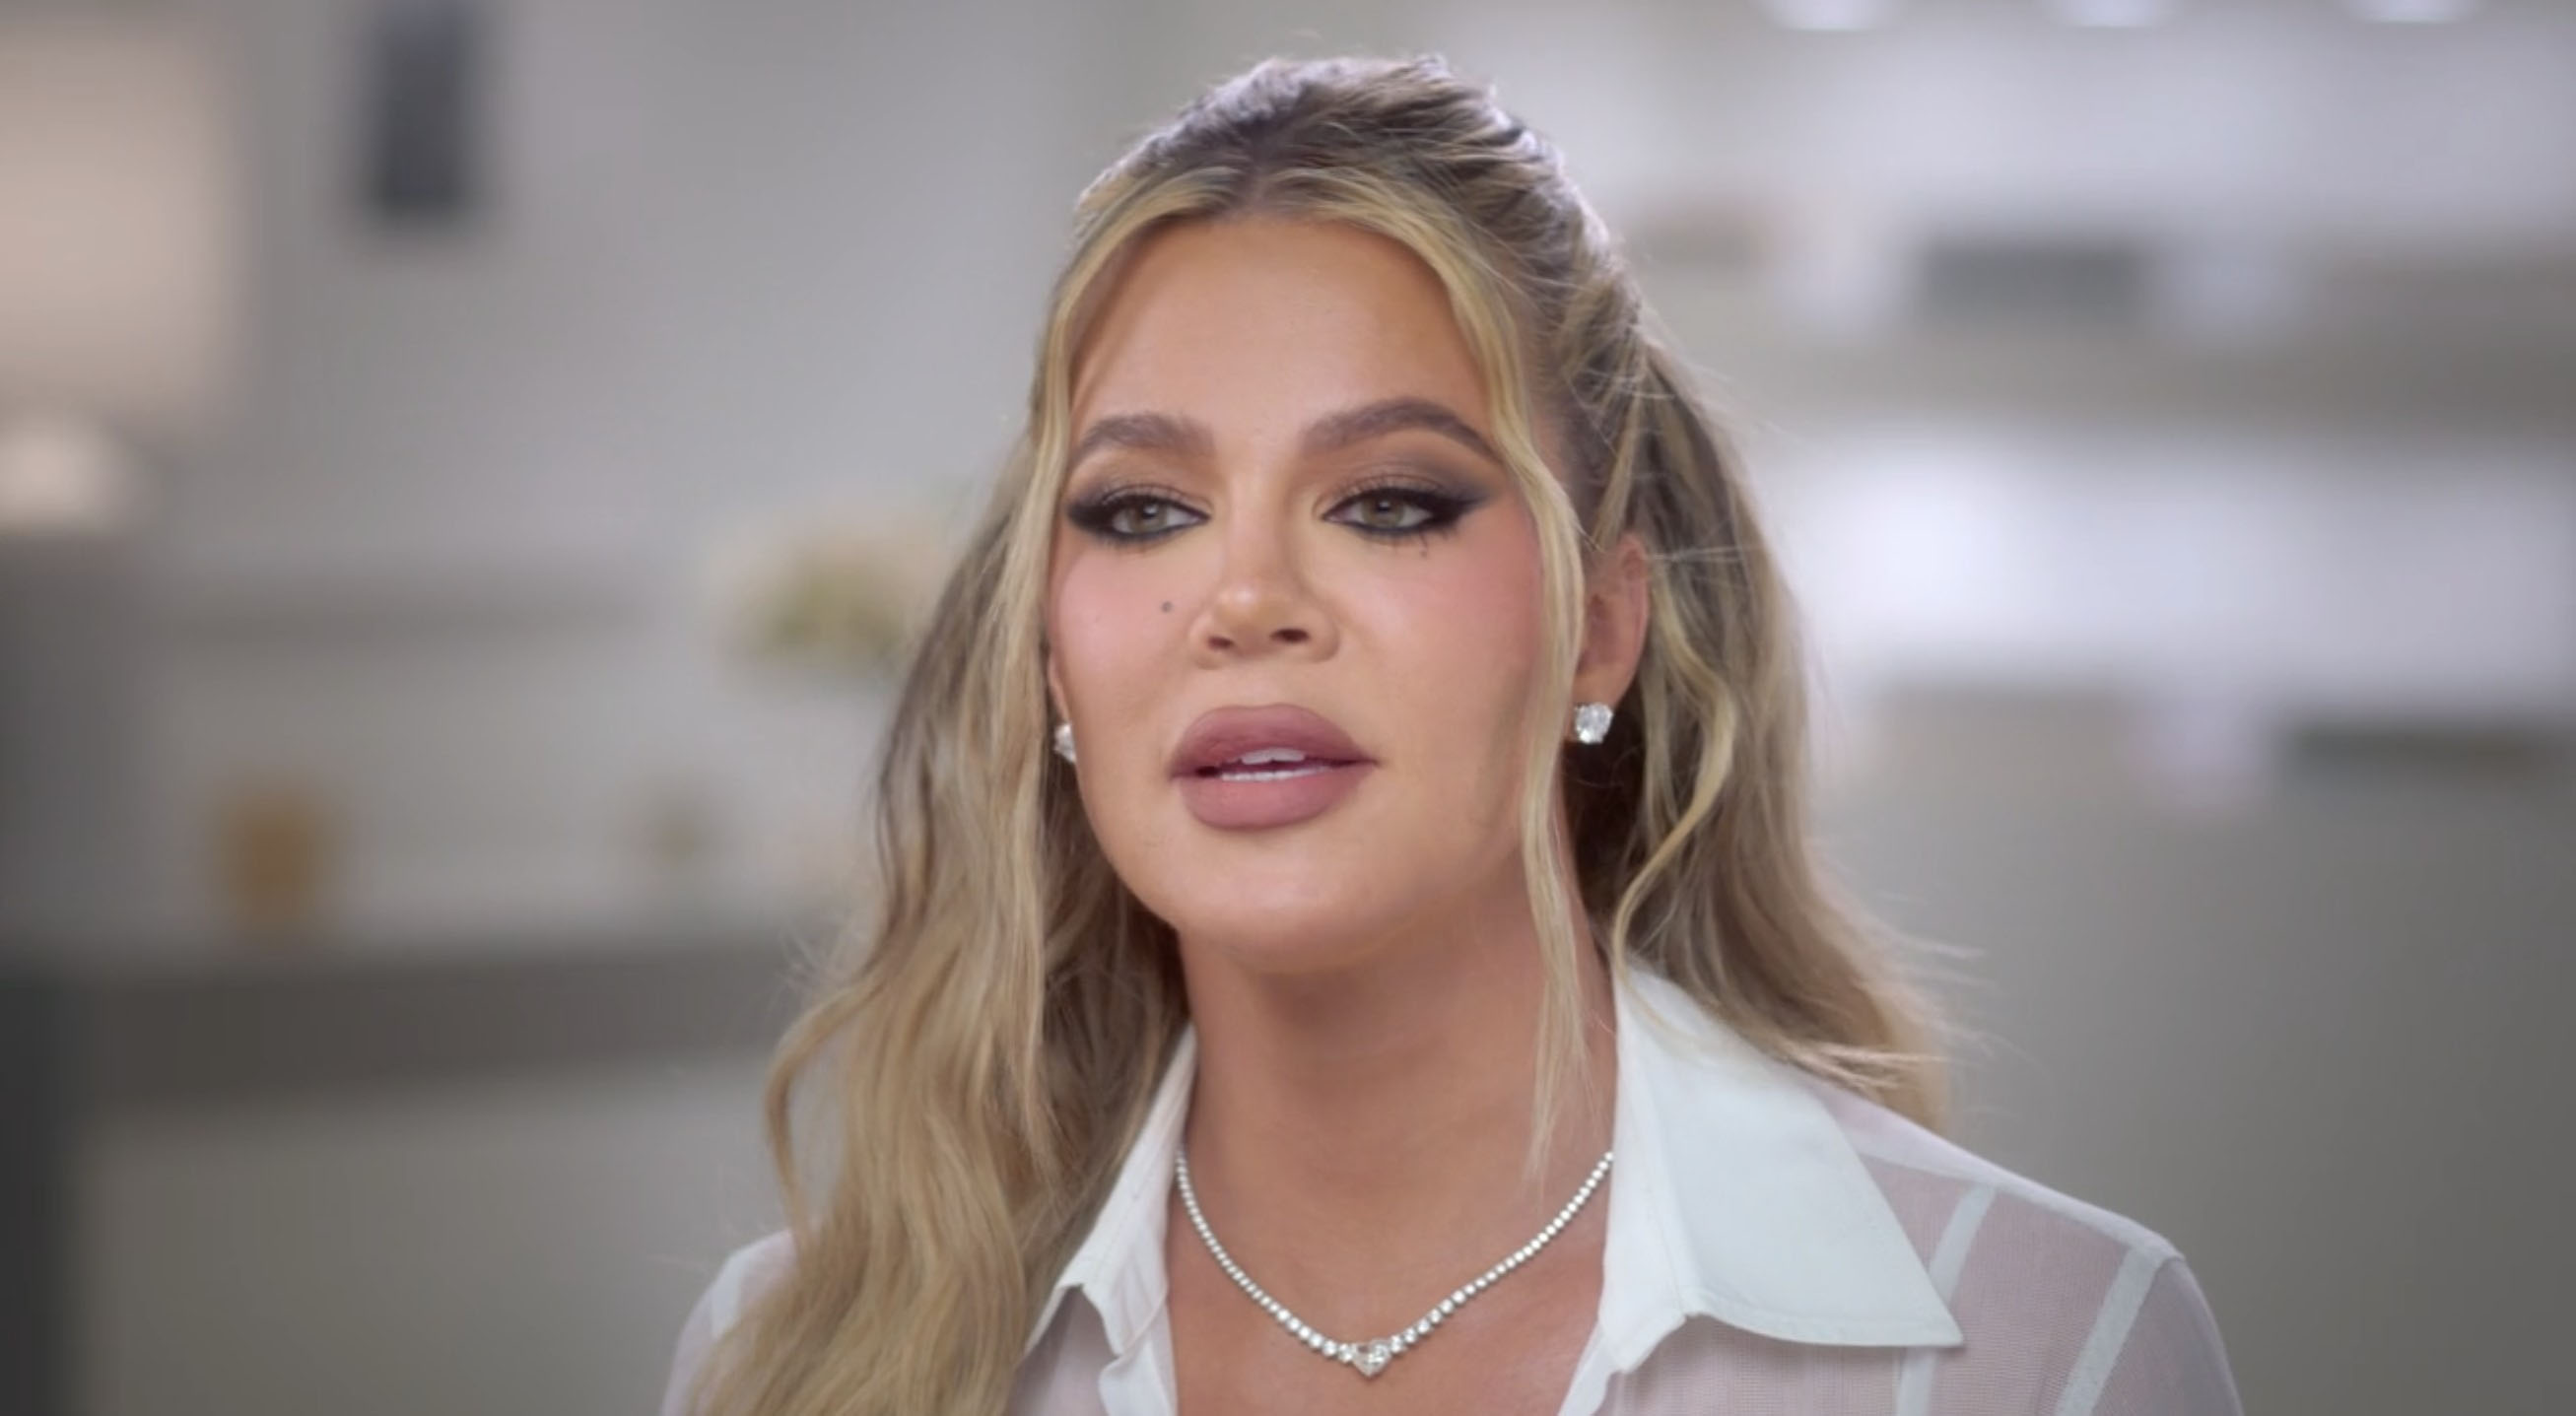 Khloe admitted in January 2021 to getting a nose job and Botox